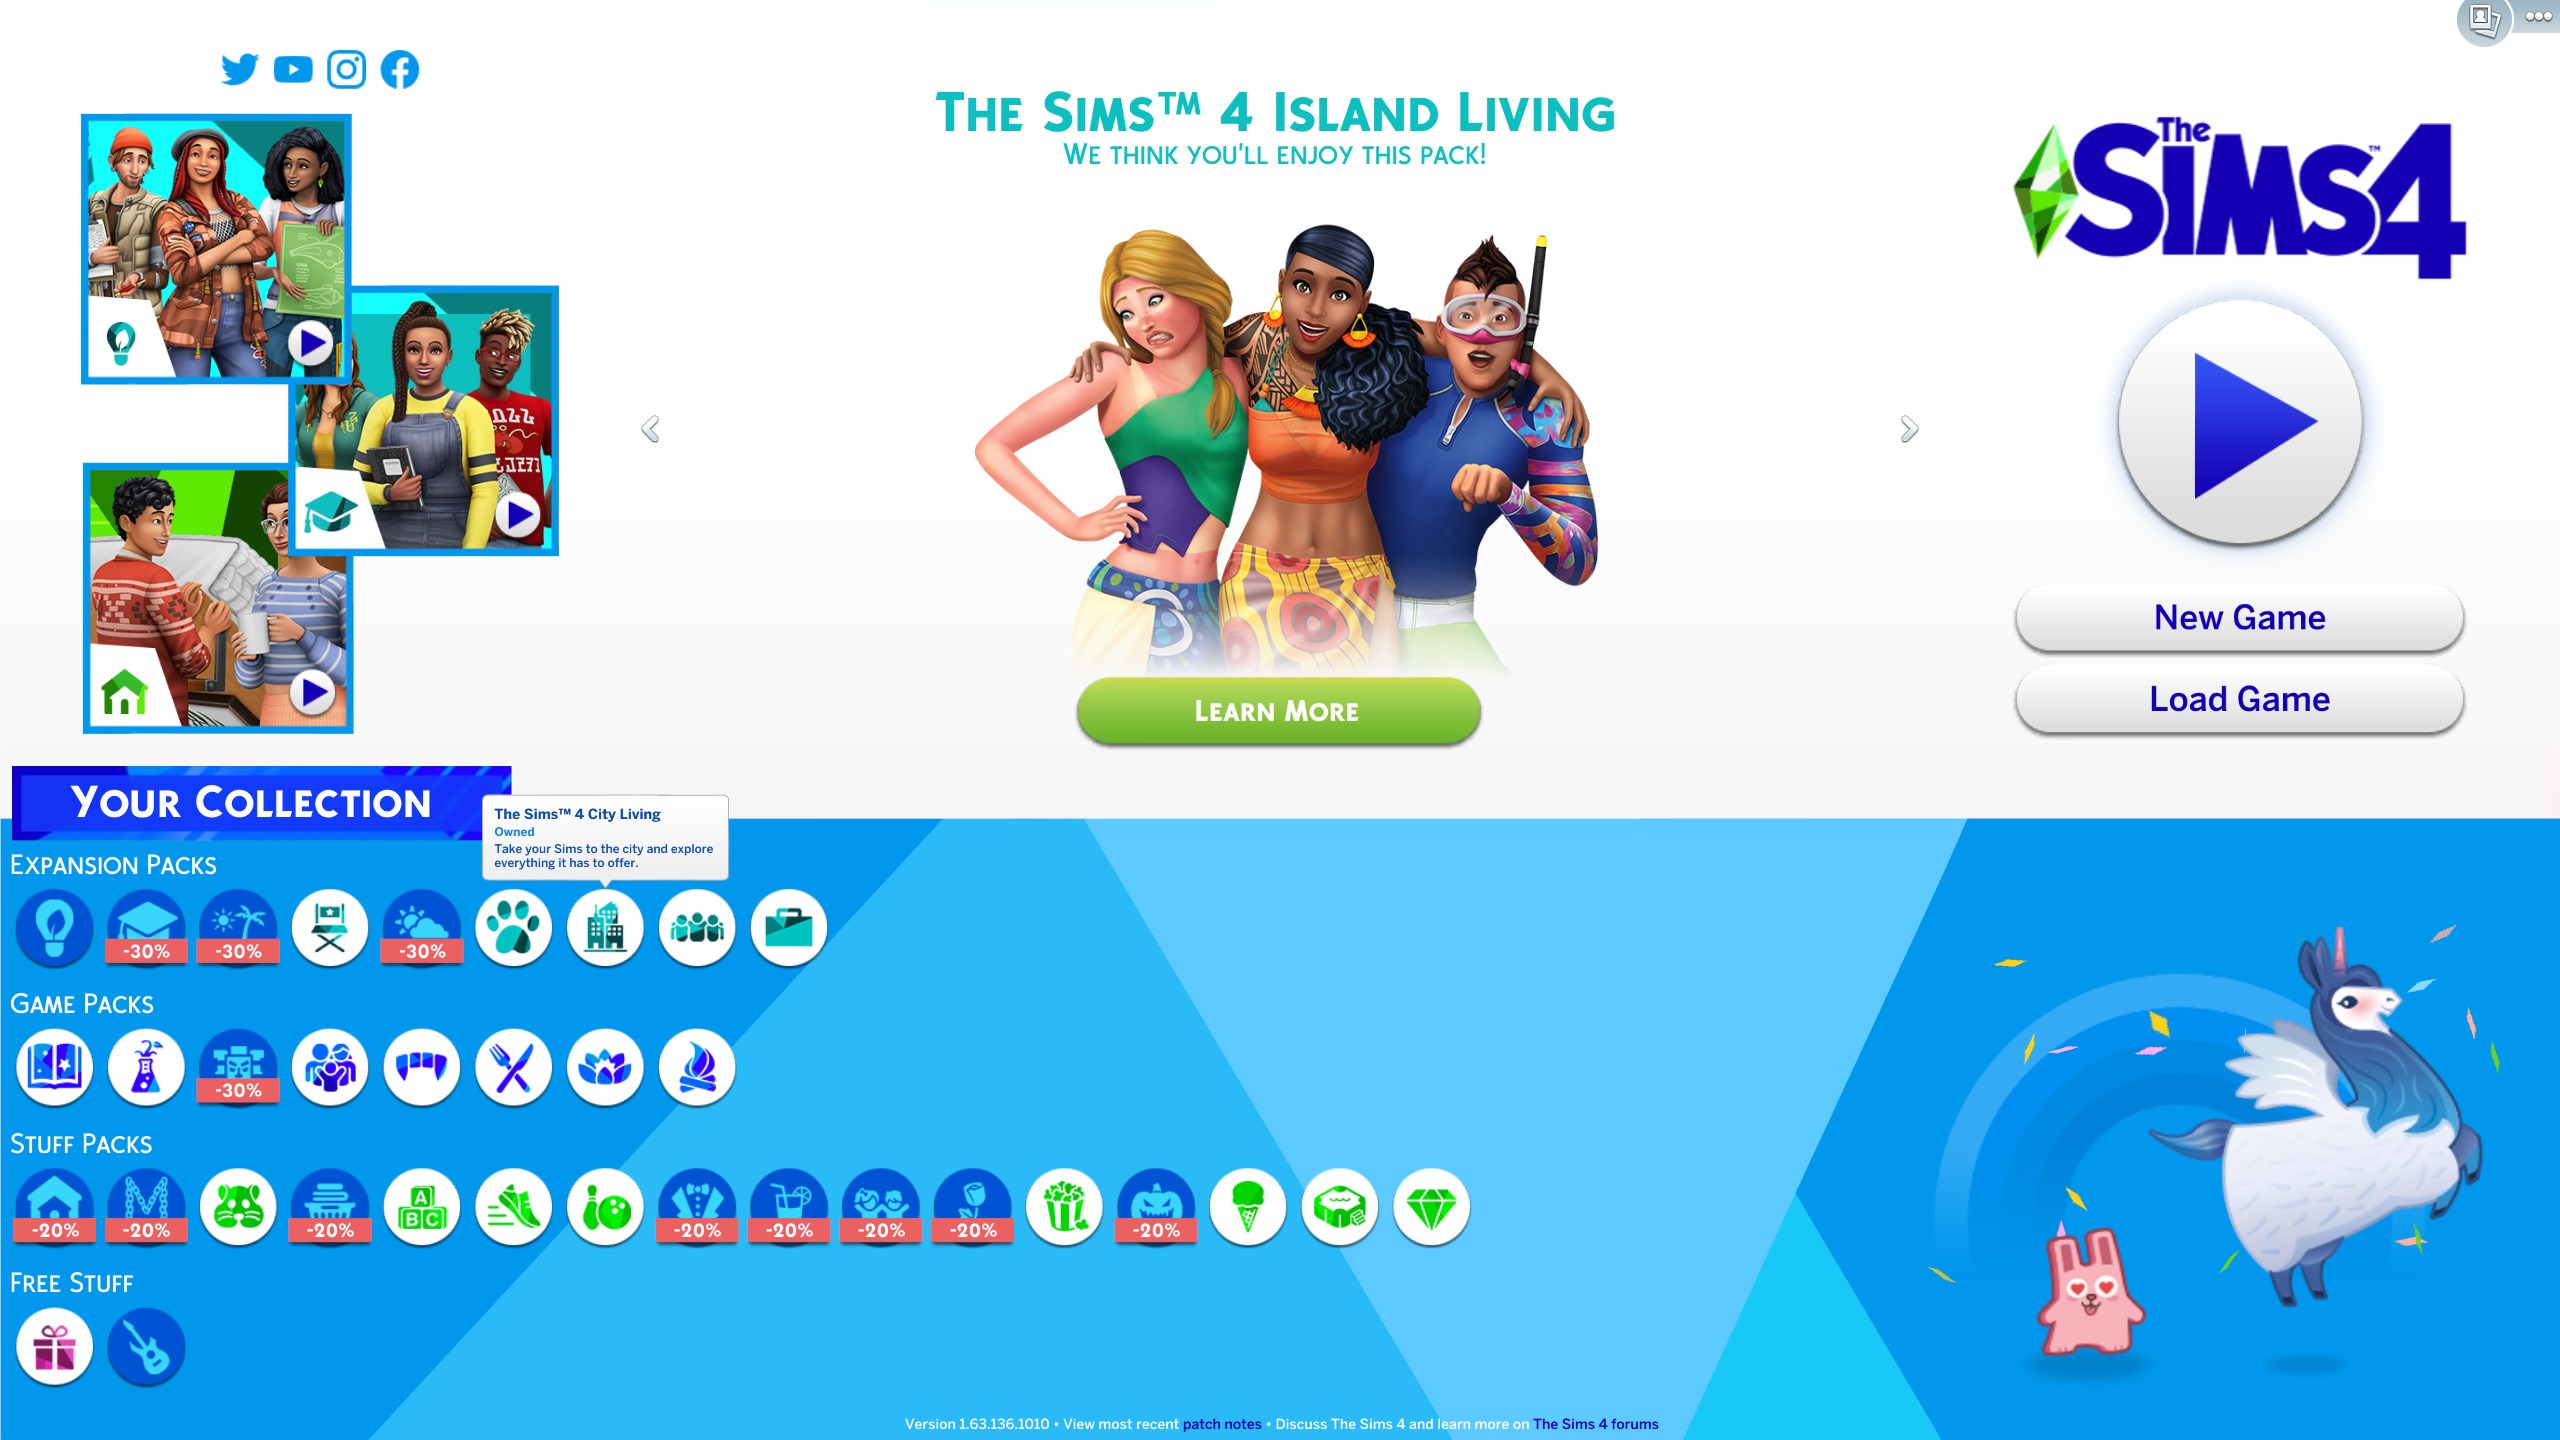 How to get free Sims 4 Expansion Packs from Origin - The Big Tech Question